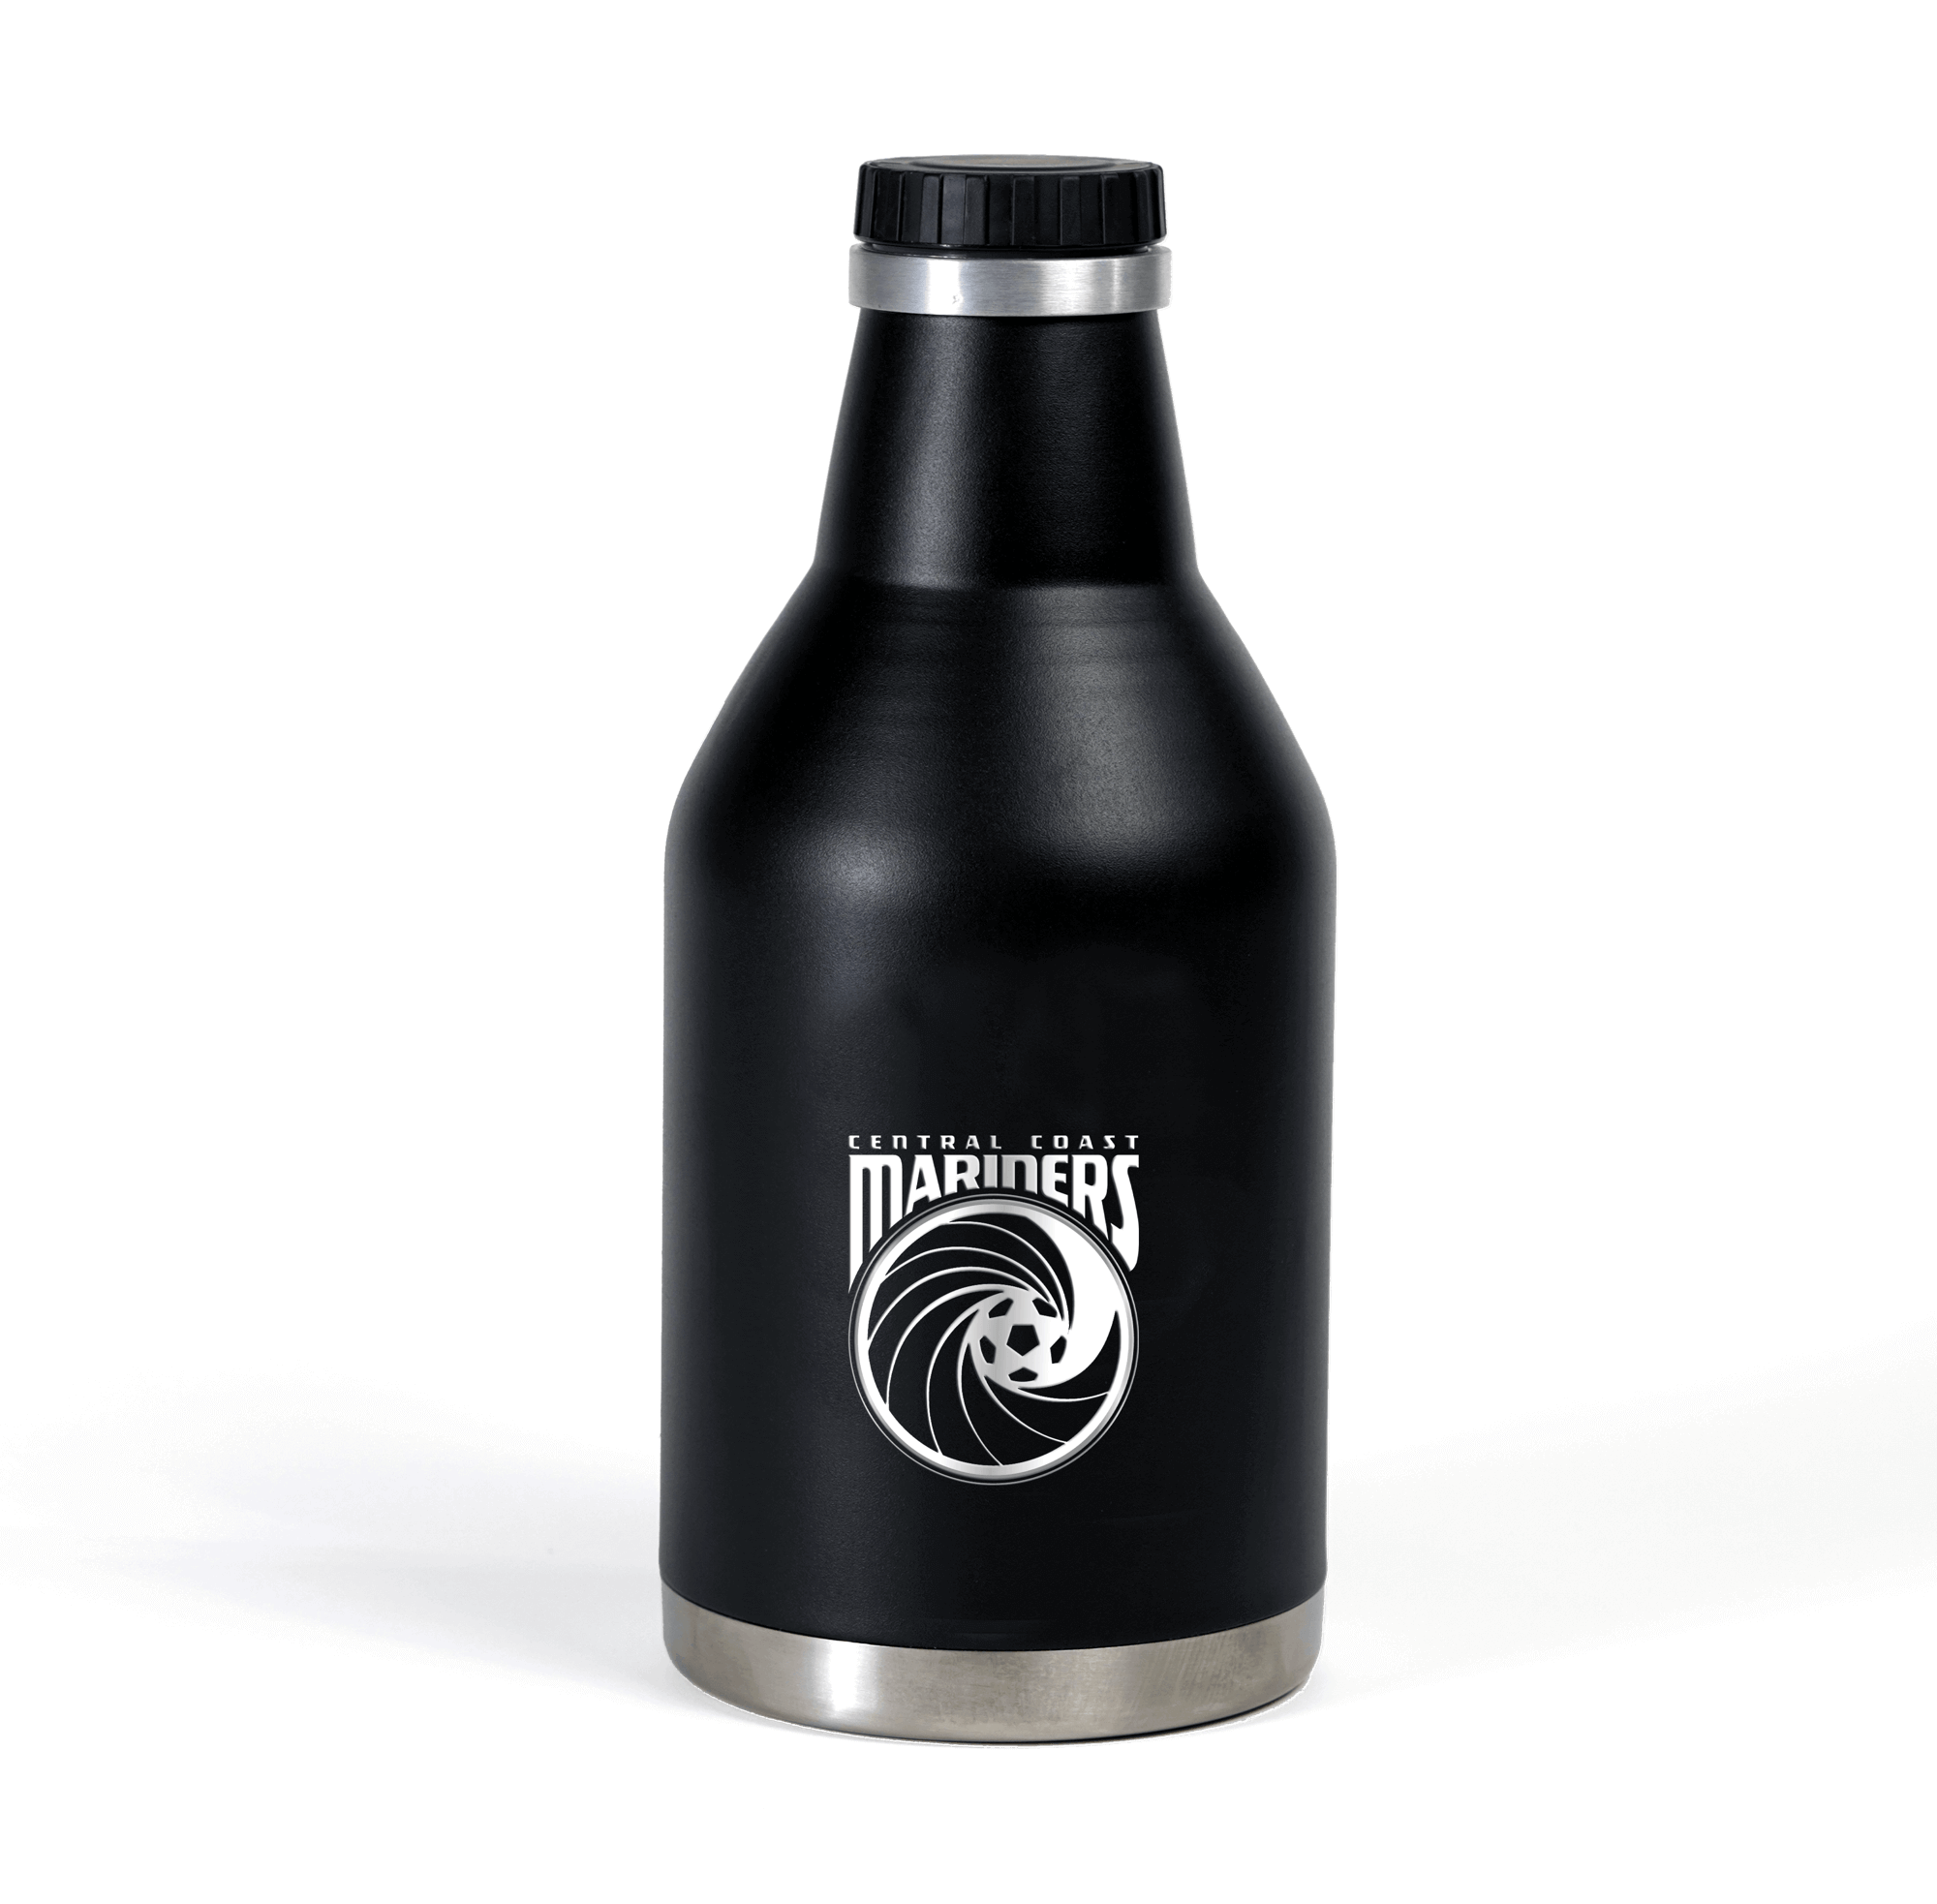 CENTRAL COAST MARINERS A-LEAGUE BEER GROWLER 2L_CENTRAL COAST MARINERS_ STUBBY CLUB